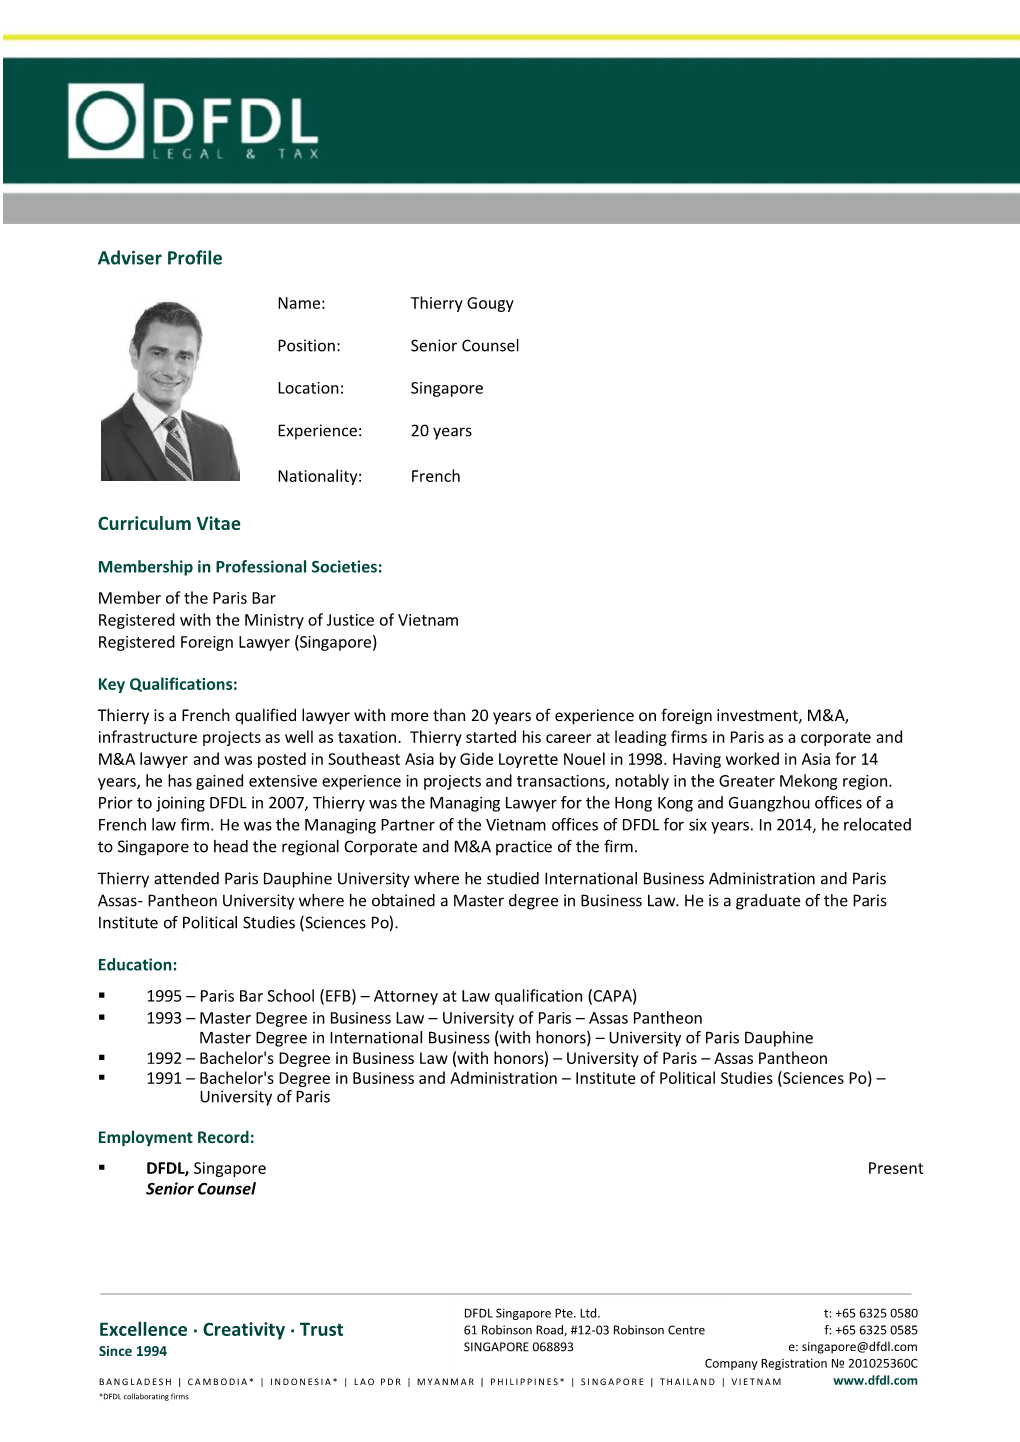 Thierry Gougy Position: Senior Counsel Location